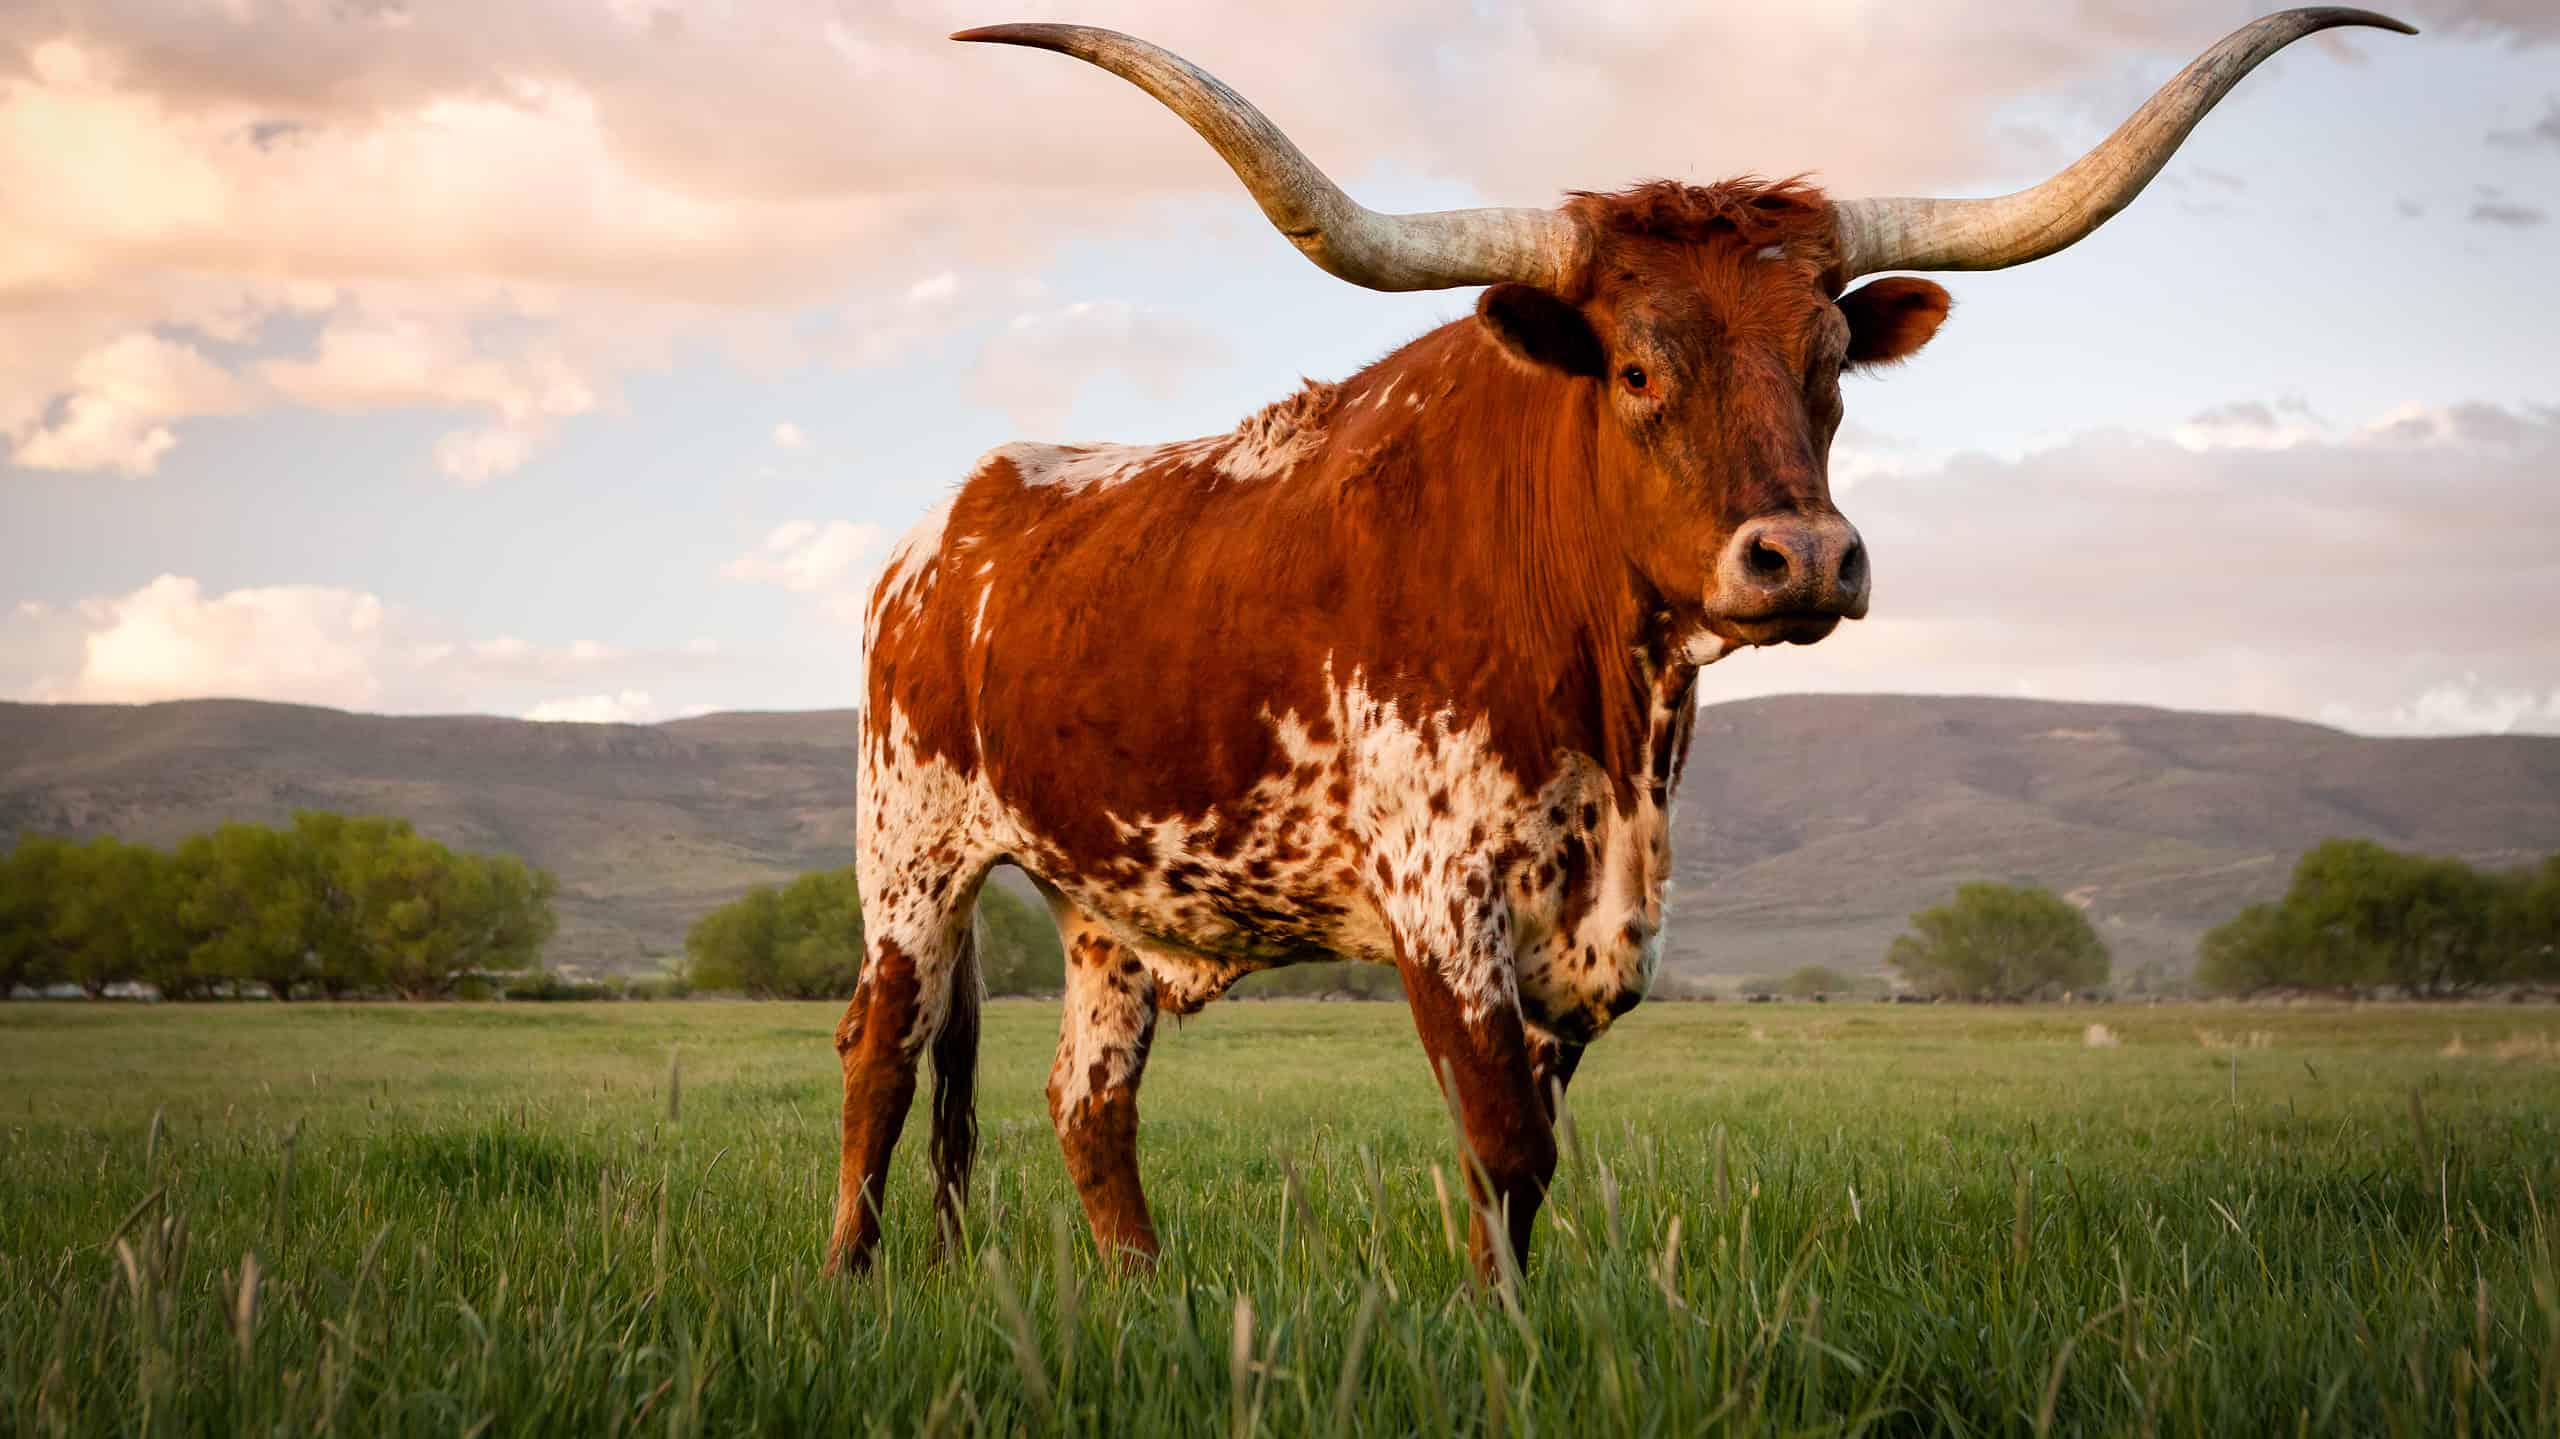 <p>Traditionally, ranches are measured in miles and acres. By these estimations, <strong>King Ranch is 825,000 acres large. Measured in miles, King Ranch is 1,289 square miles large.</strong></p>    <p>In comparison, other big Texas cities take up roughly a third of the square mileage that King Ranch encompasses. King Ranch's 1,200+ square miles dwarfs the square mileage of major cities like Houston, at 599.59 square miles, and San Antonio, at 460.93 square miles.</p>    <p>Acres and square miles have been used by both American and English agencies as a unit of measurement for land.</p><p>Sharks, lions, alligators, and more! Don’t miss today’s latest and most exciting animal news. <strong><a href="https://www.msn.com/en-us/channel/source/AZ%20Animals%20US/sr-vid-7etr9q8xun6k6508c3nufaum0de3dqktiq6h27ddeagnfug30wka">Click here to access the A-Z Animals profile page</a> and be sure to hit the <em>Follow</em> button here or at the top of this article!</strong></p> <p>Have feedback? Add a comment below!</p>